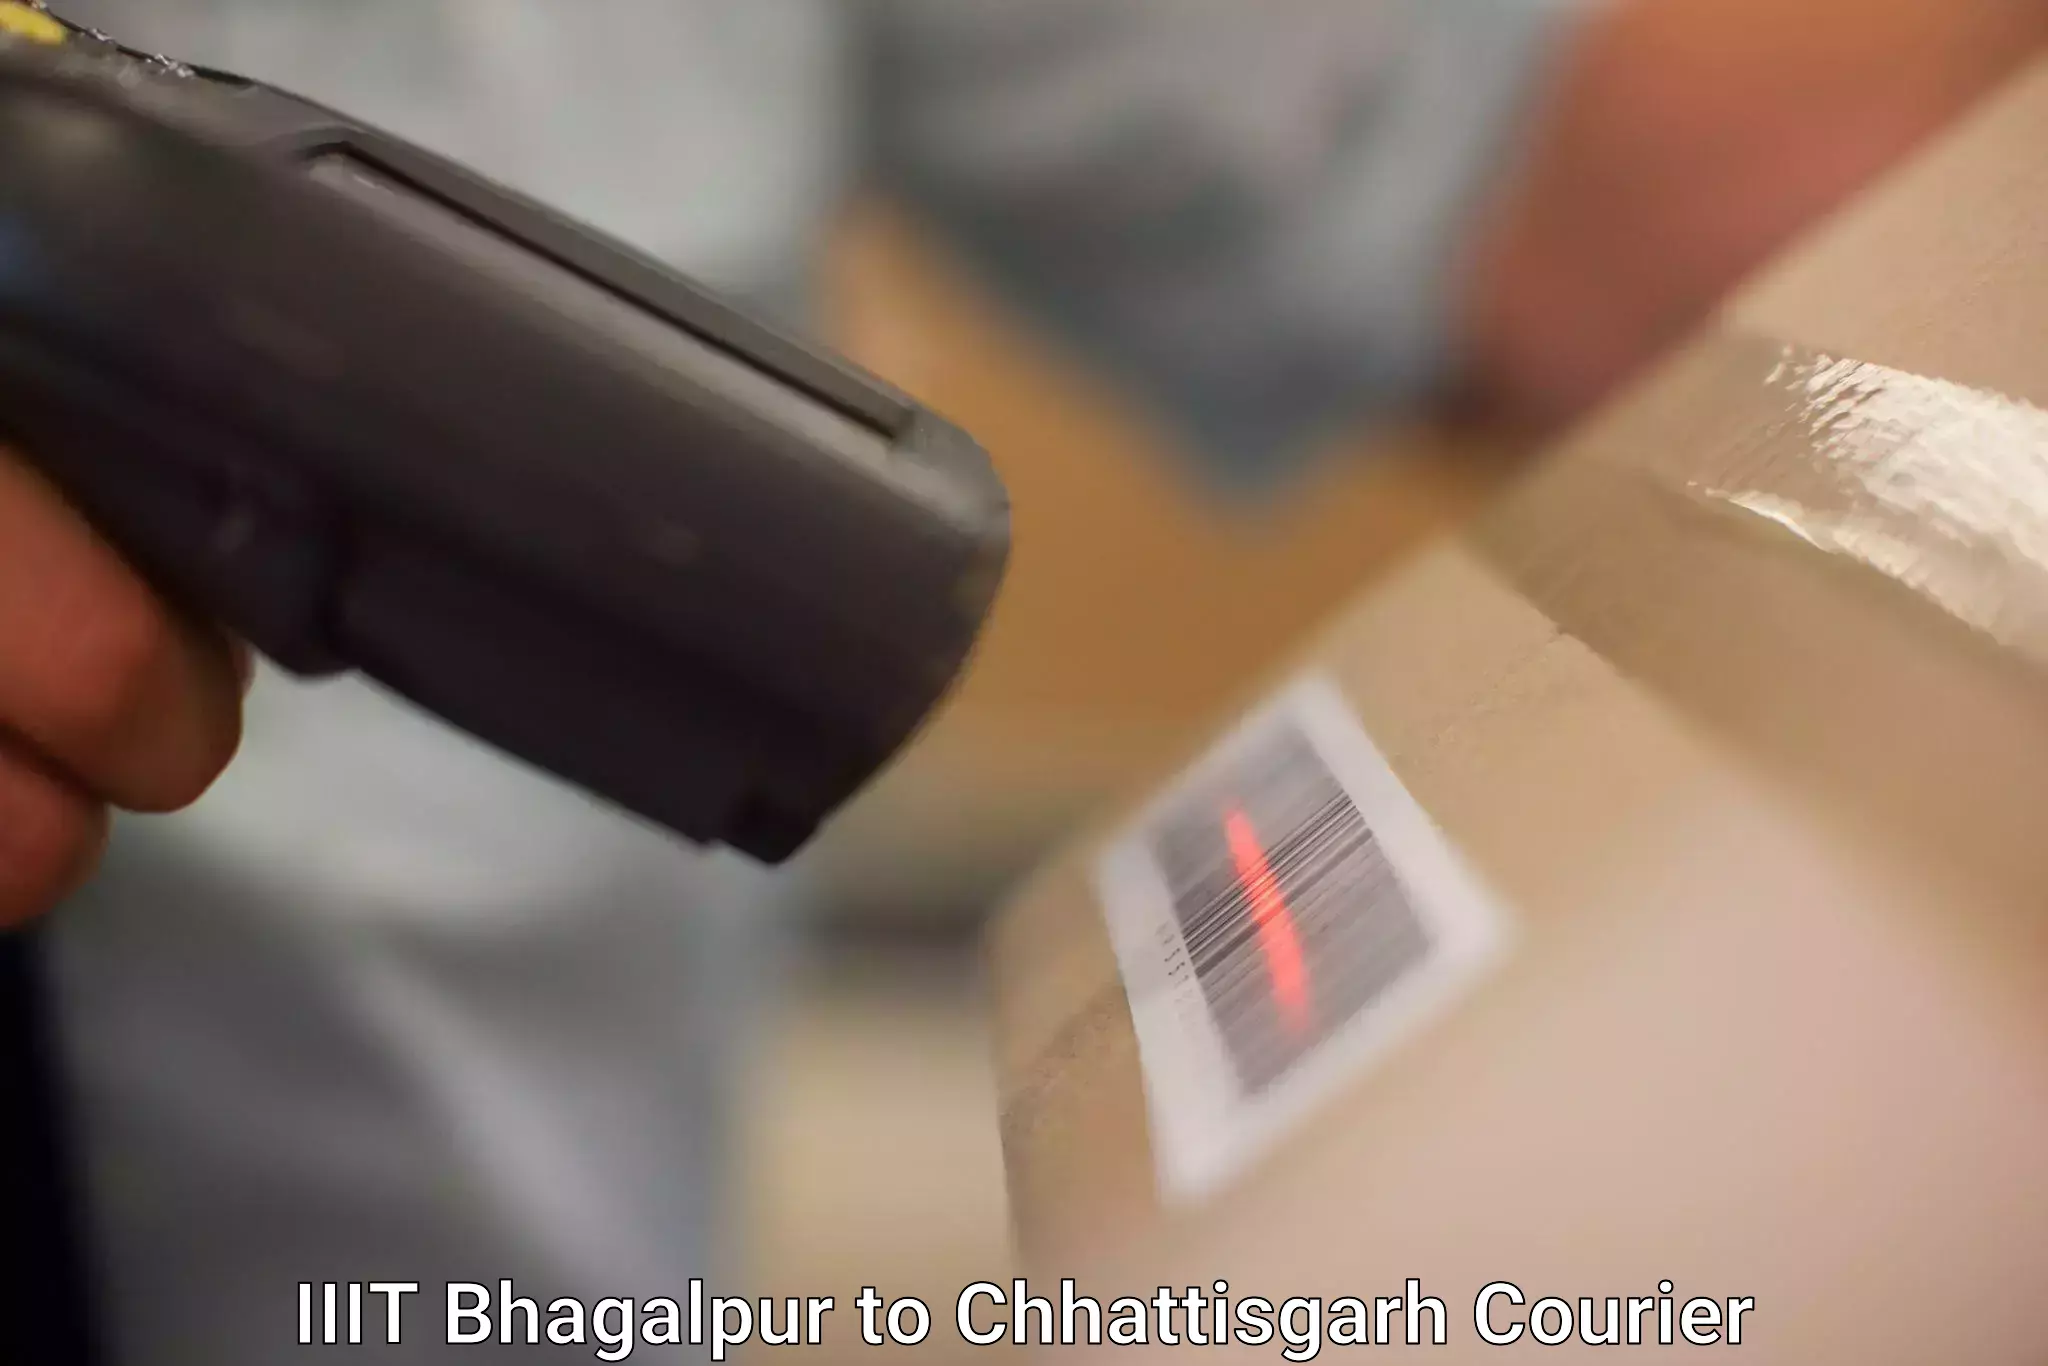 Easy access courier services IIIT Bhagalpur to bagbahra